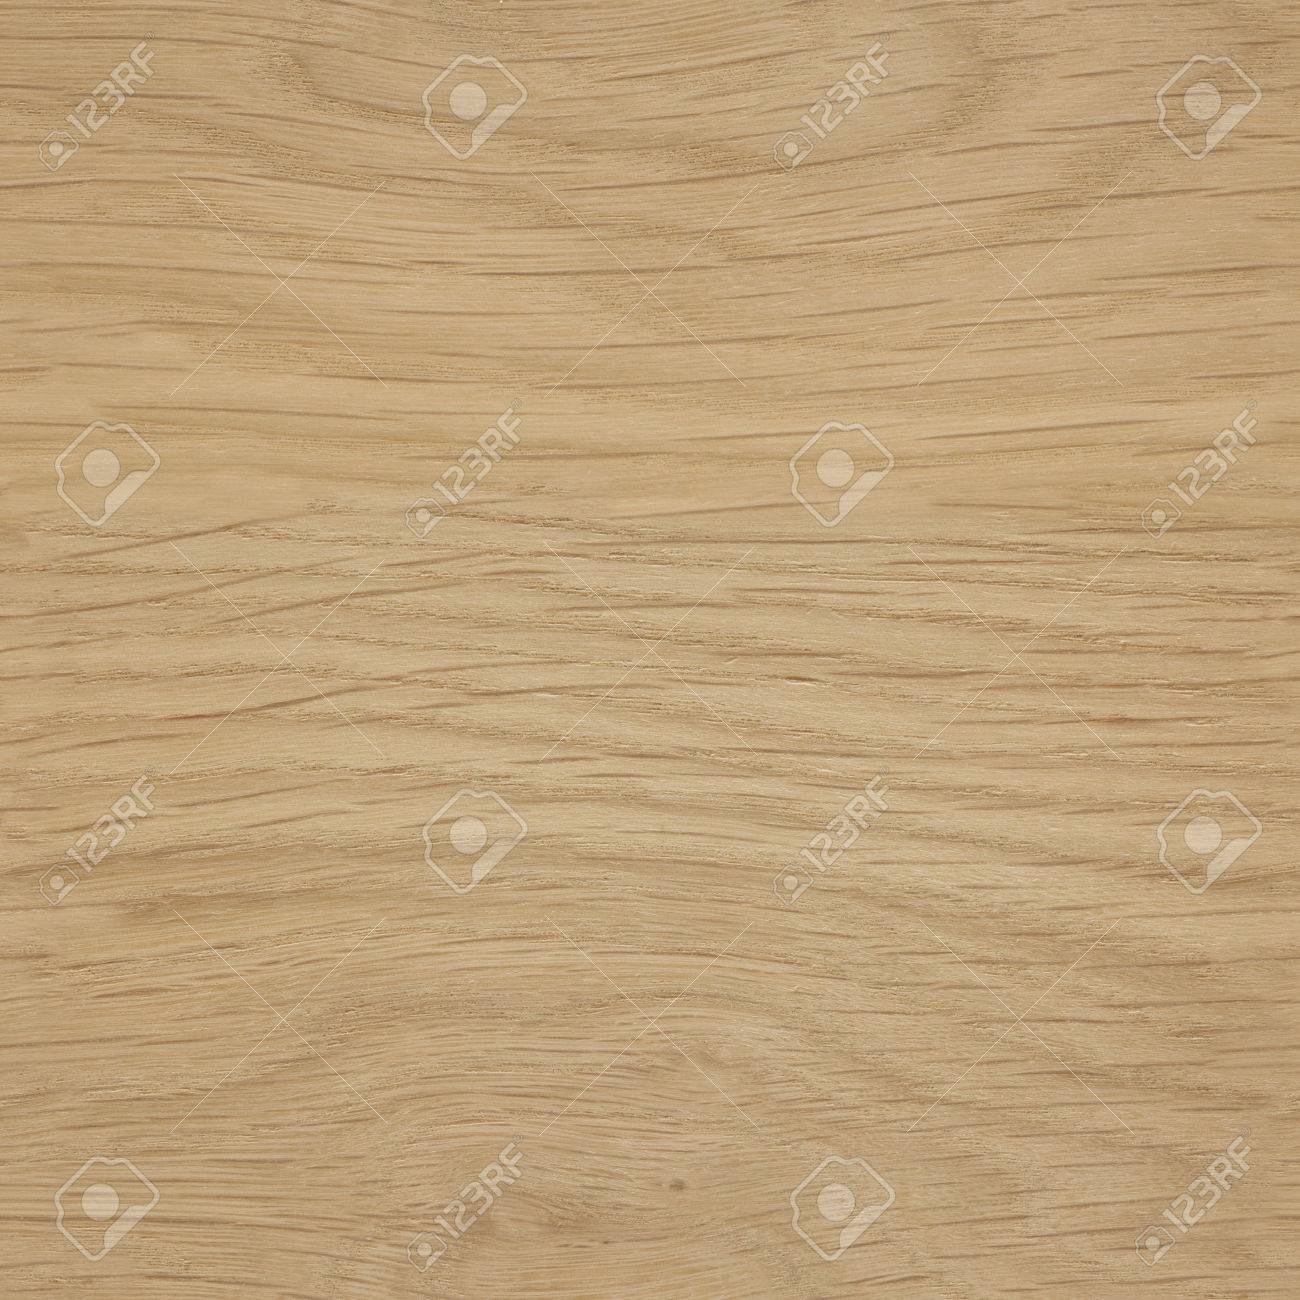 Repeating Oak Background Texture This Picture Is A Tileable